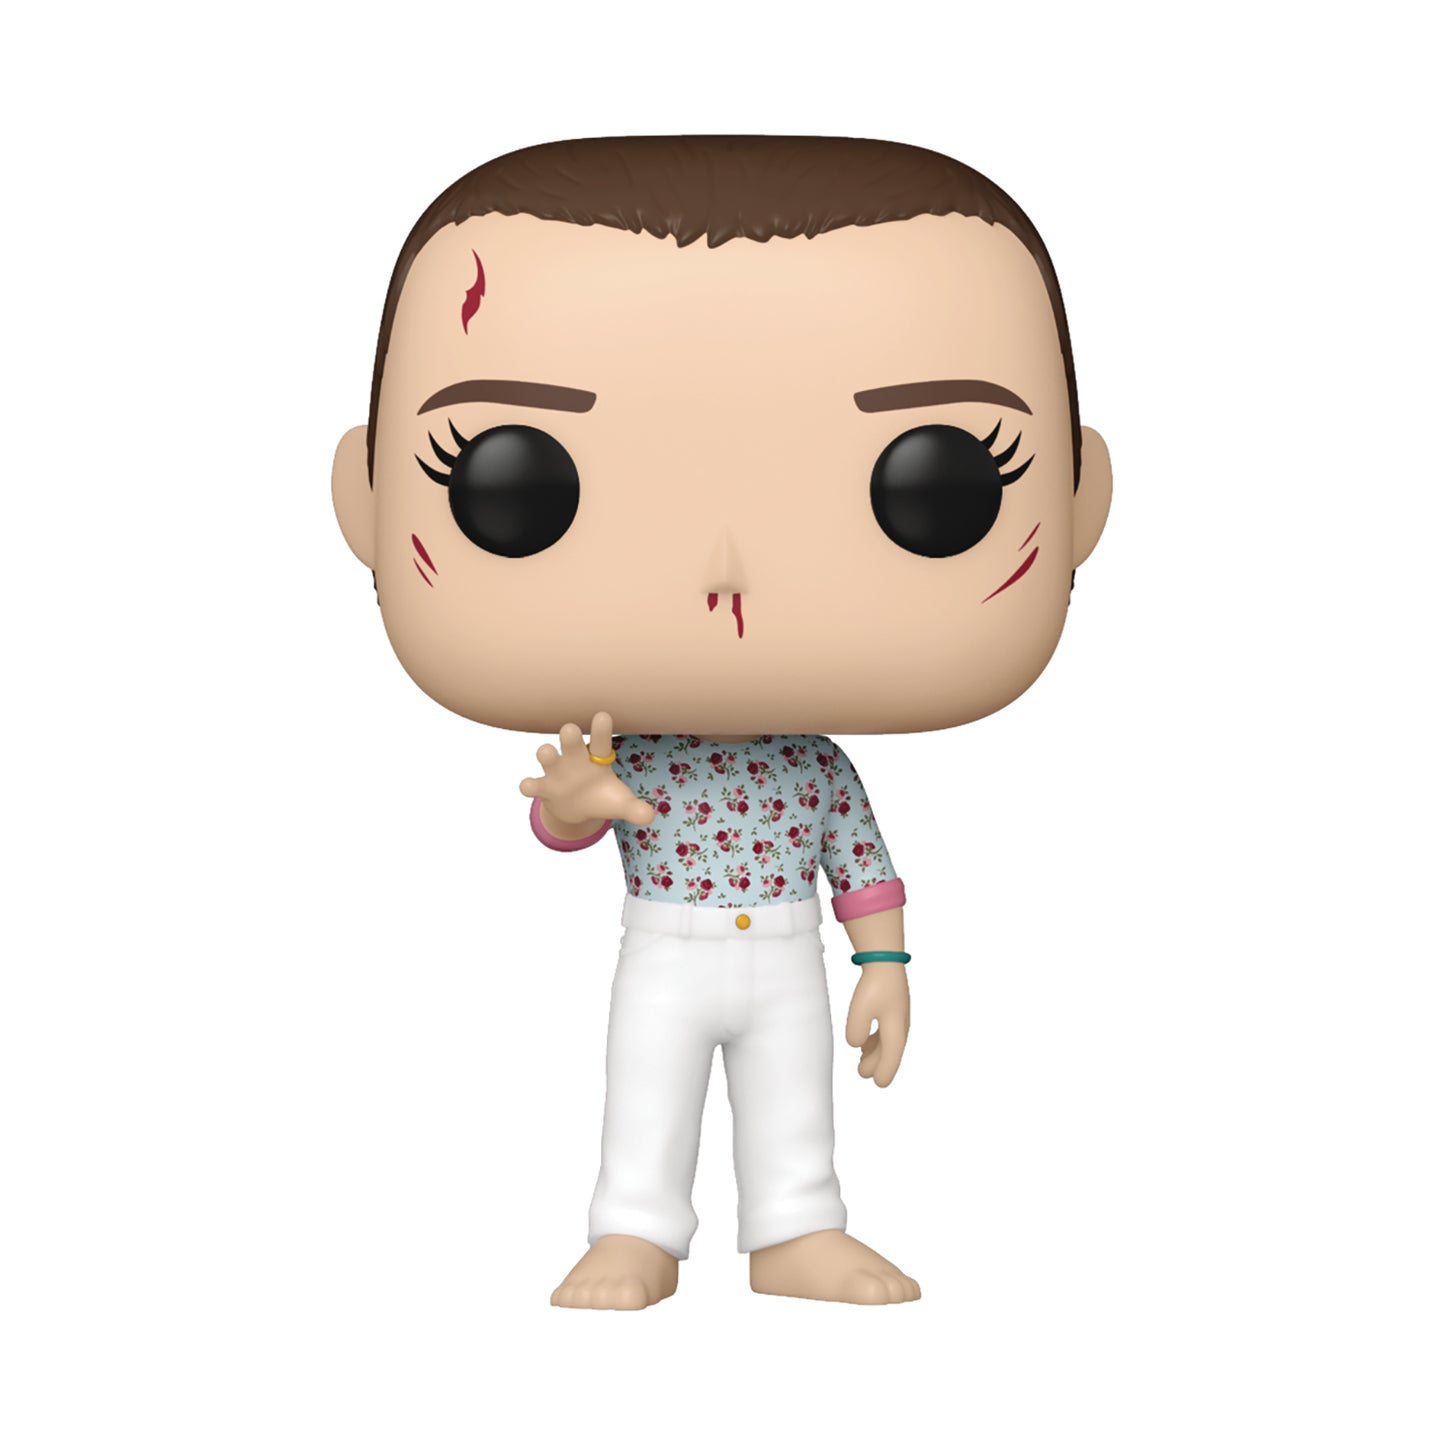 Funko POP! Television: Stranger Things - Eleven #1457